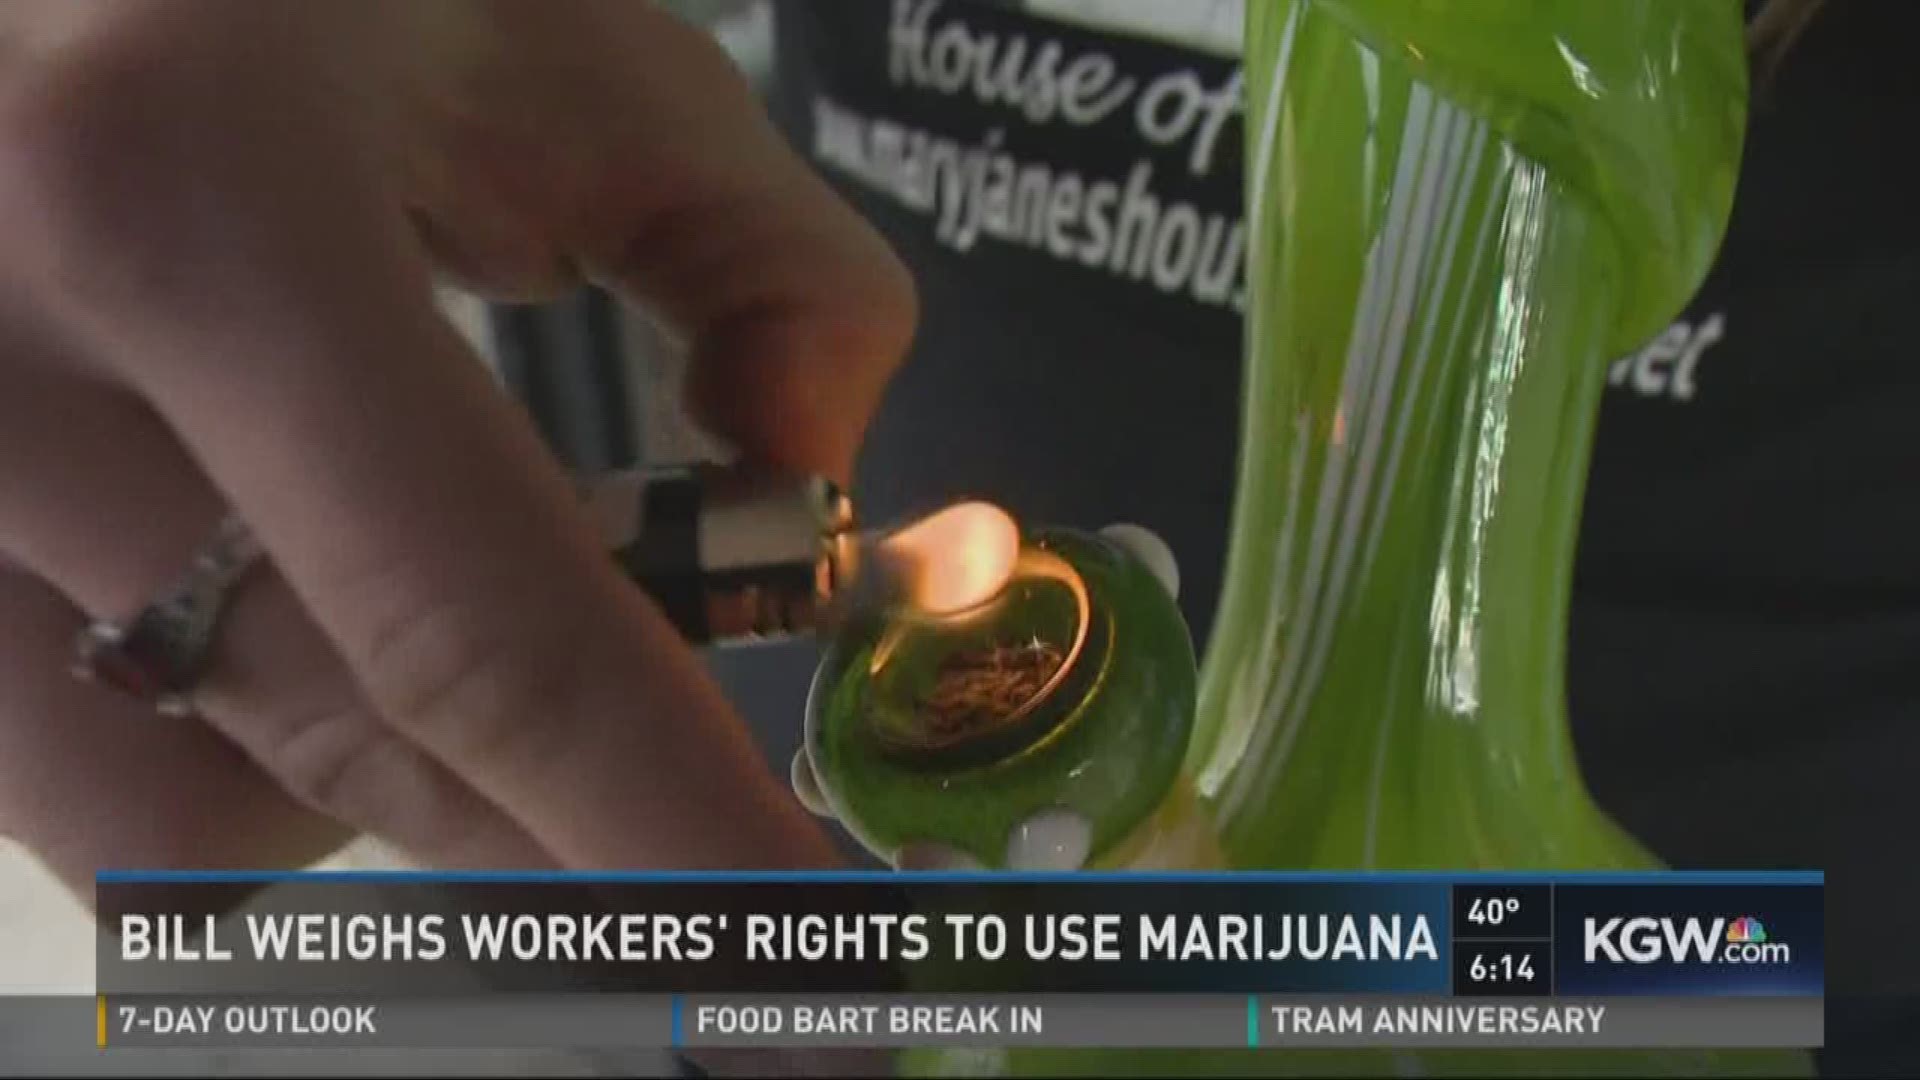 Bill weighs workers' rights to use marijuana